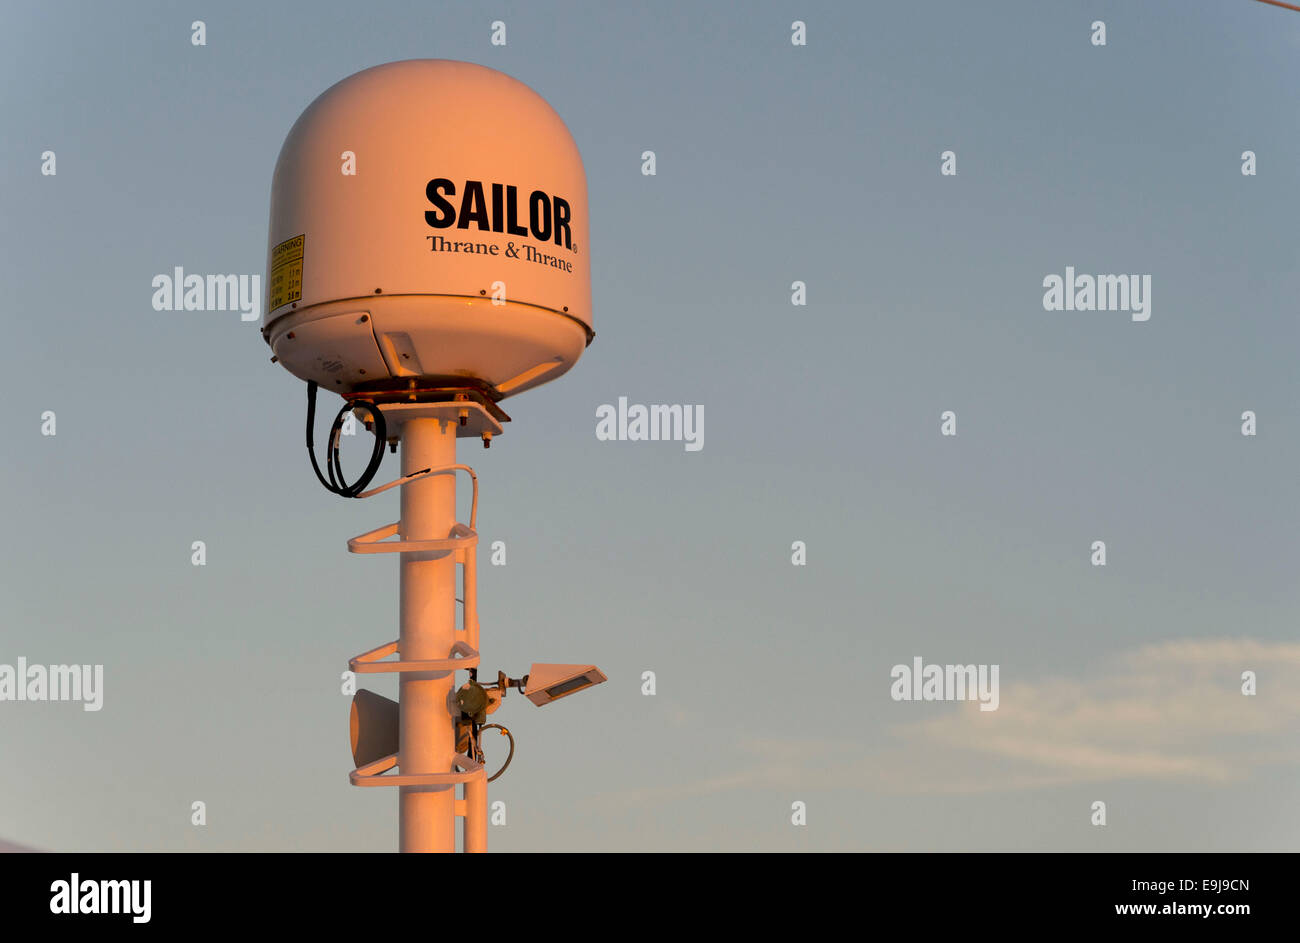 A Thrane and Thrane Sailor radar system used on cruise ships. Stock Photo